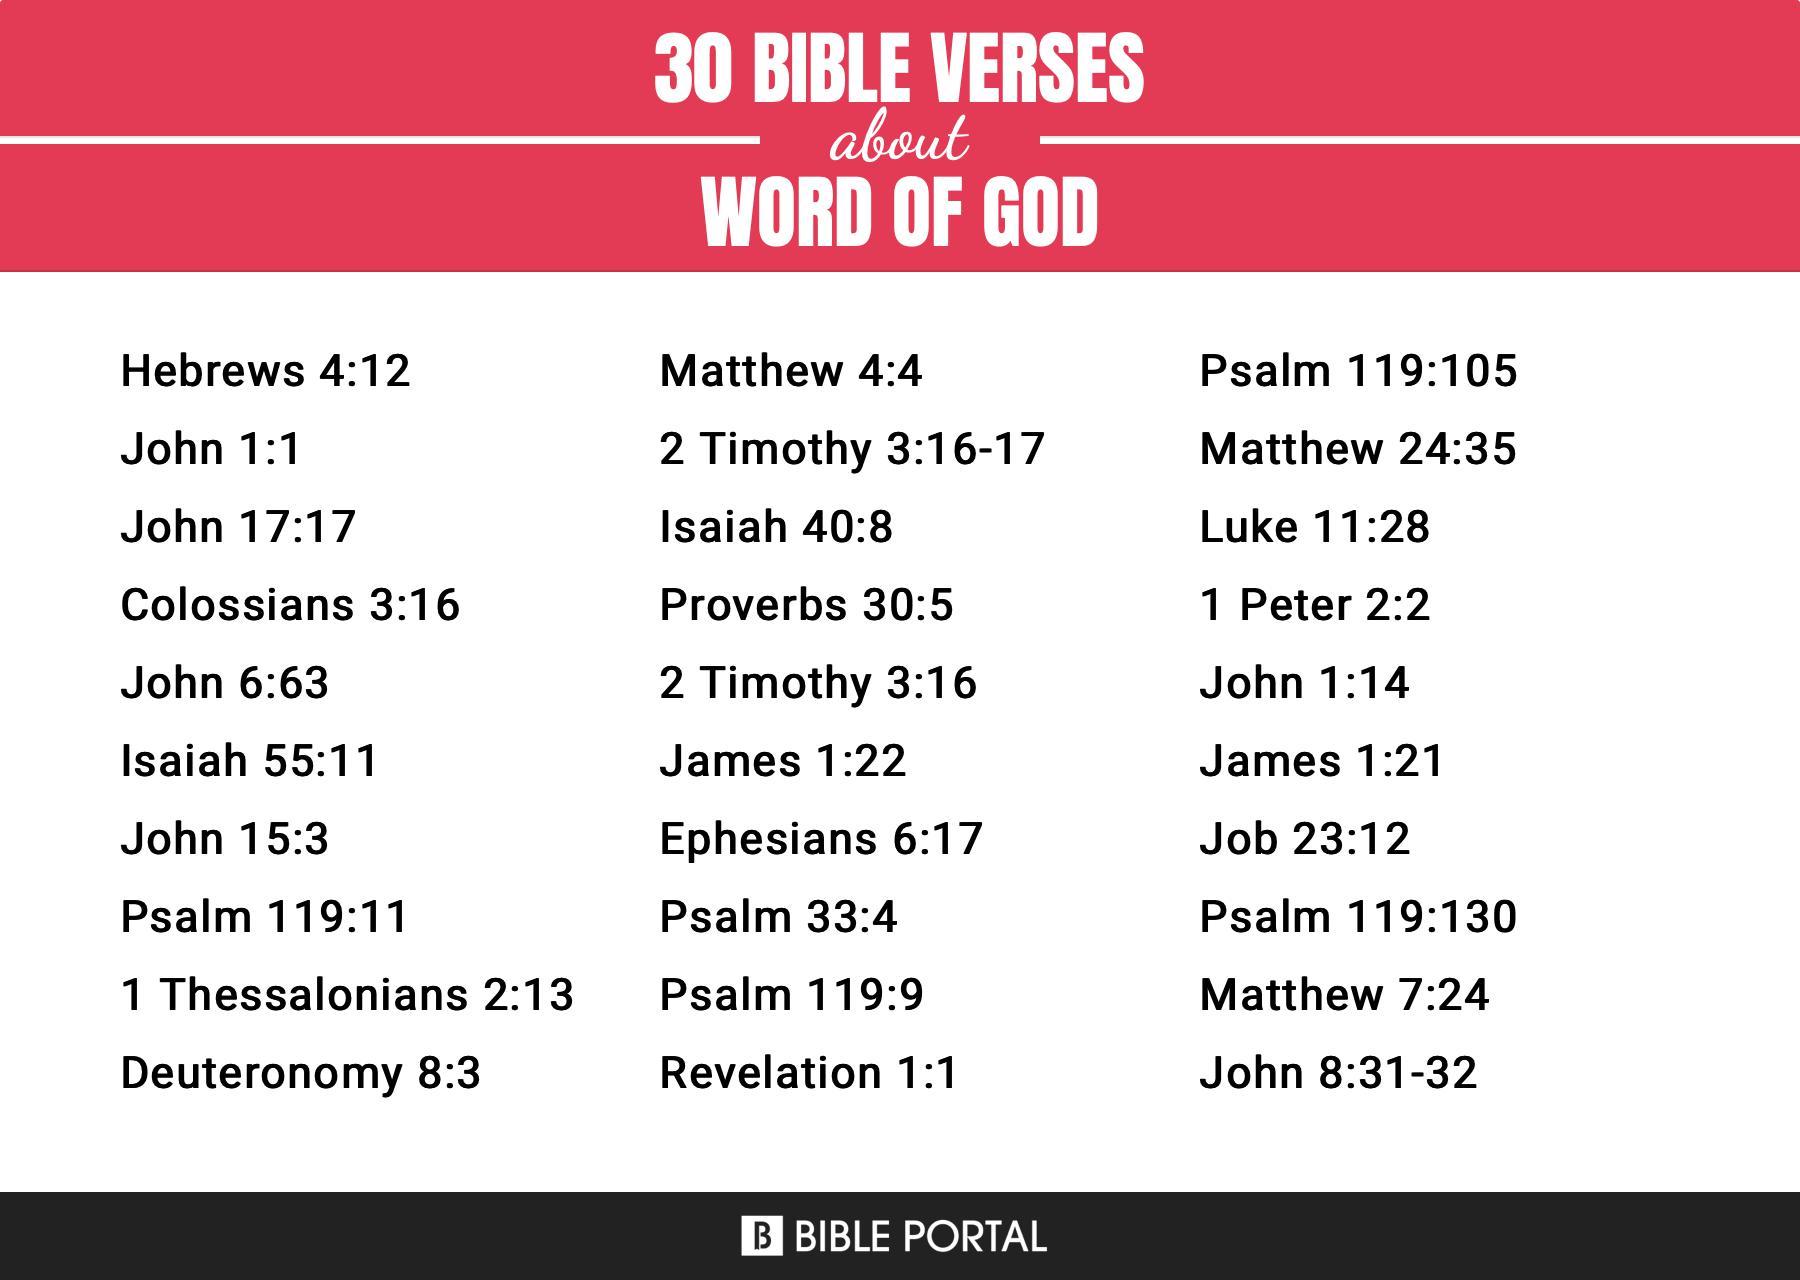 What Does the Bible Say about Word Of God?